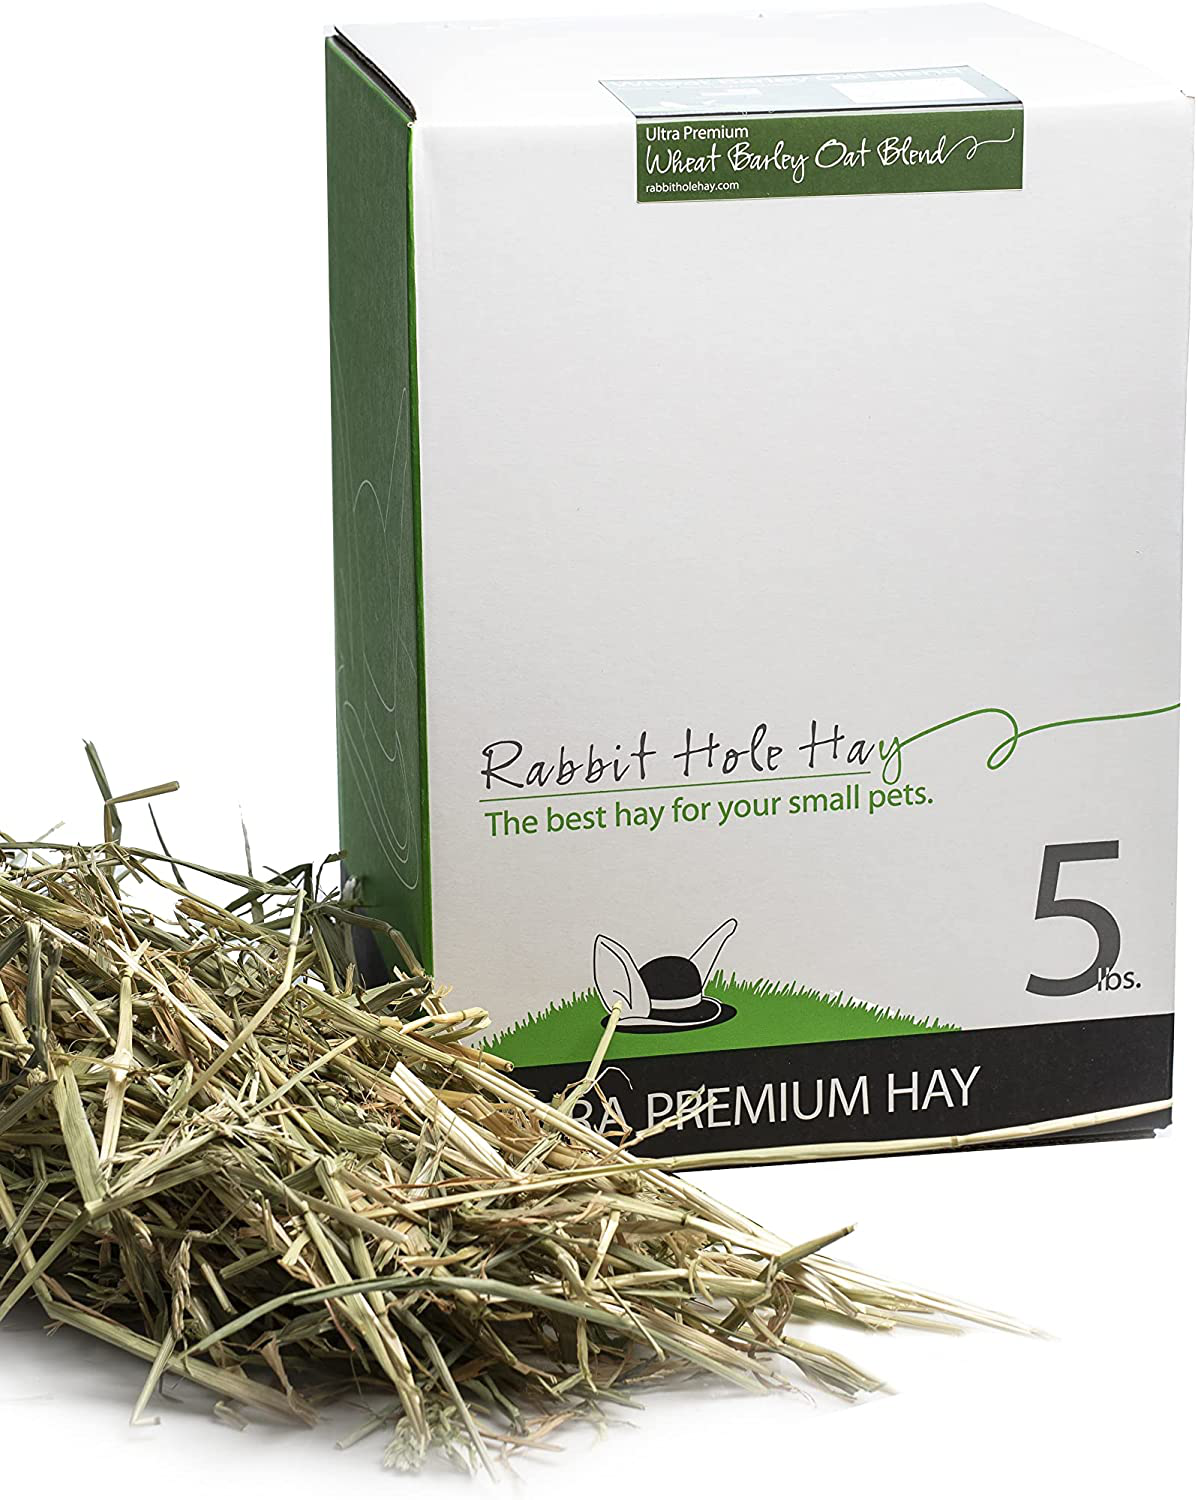 Rabbit Hole Hay Ultra Premium, Hand Packed Wheat, Barley, Oat Blend for Your Small Pet Rabbit, Chinchilla, or Guinea Pig